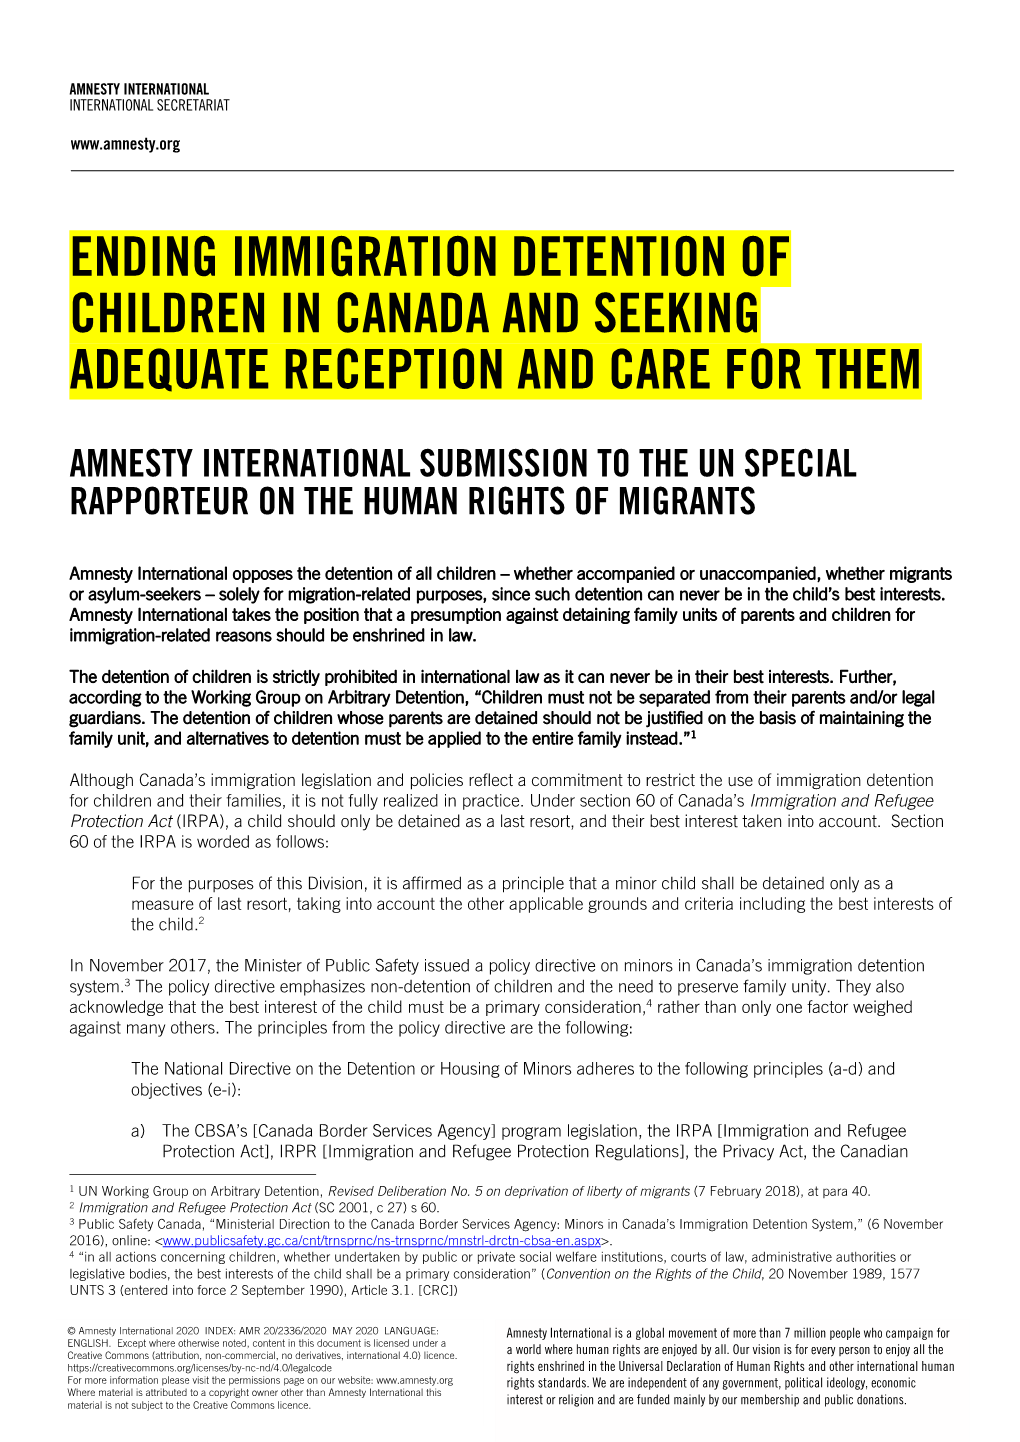 Ending Immigration Detention of Children in Canada and Seeking Adequate Reception and Care for Them